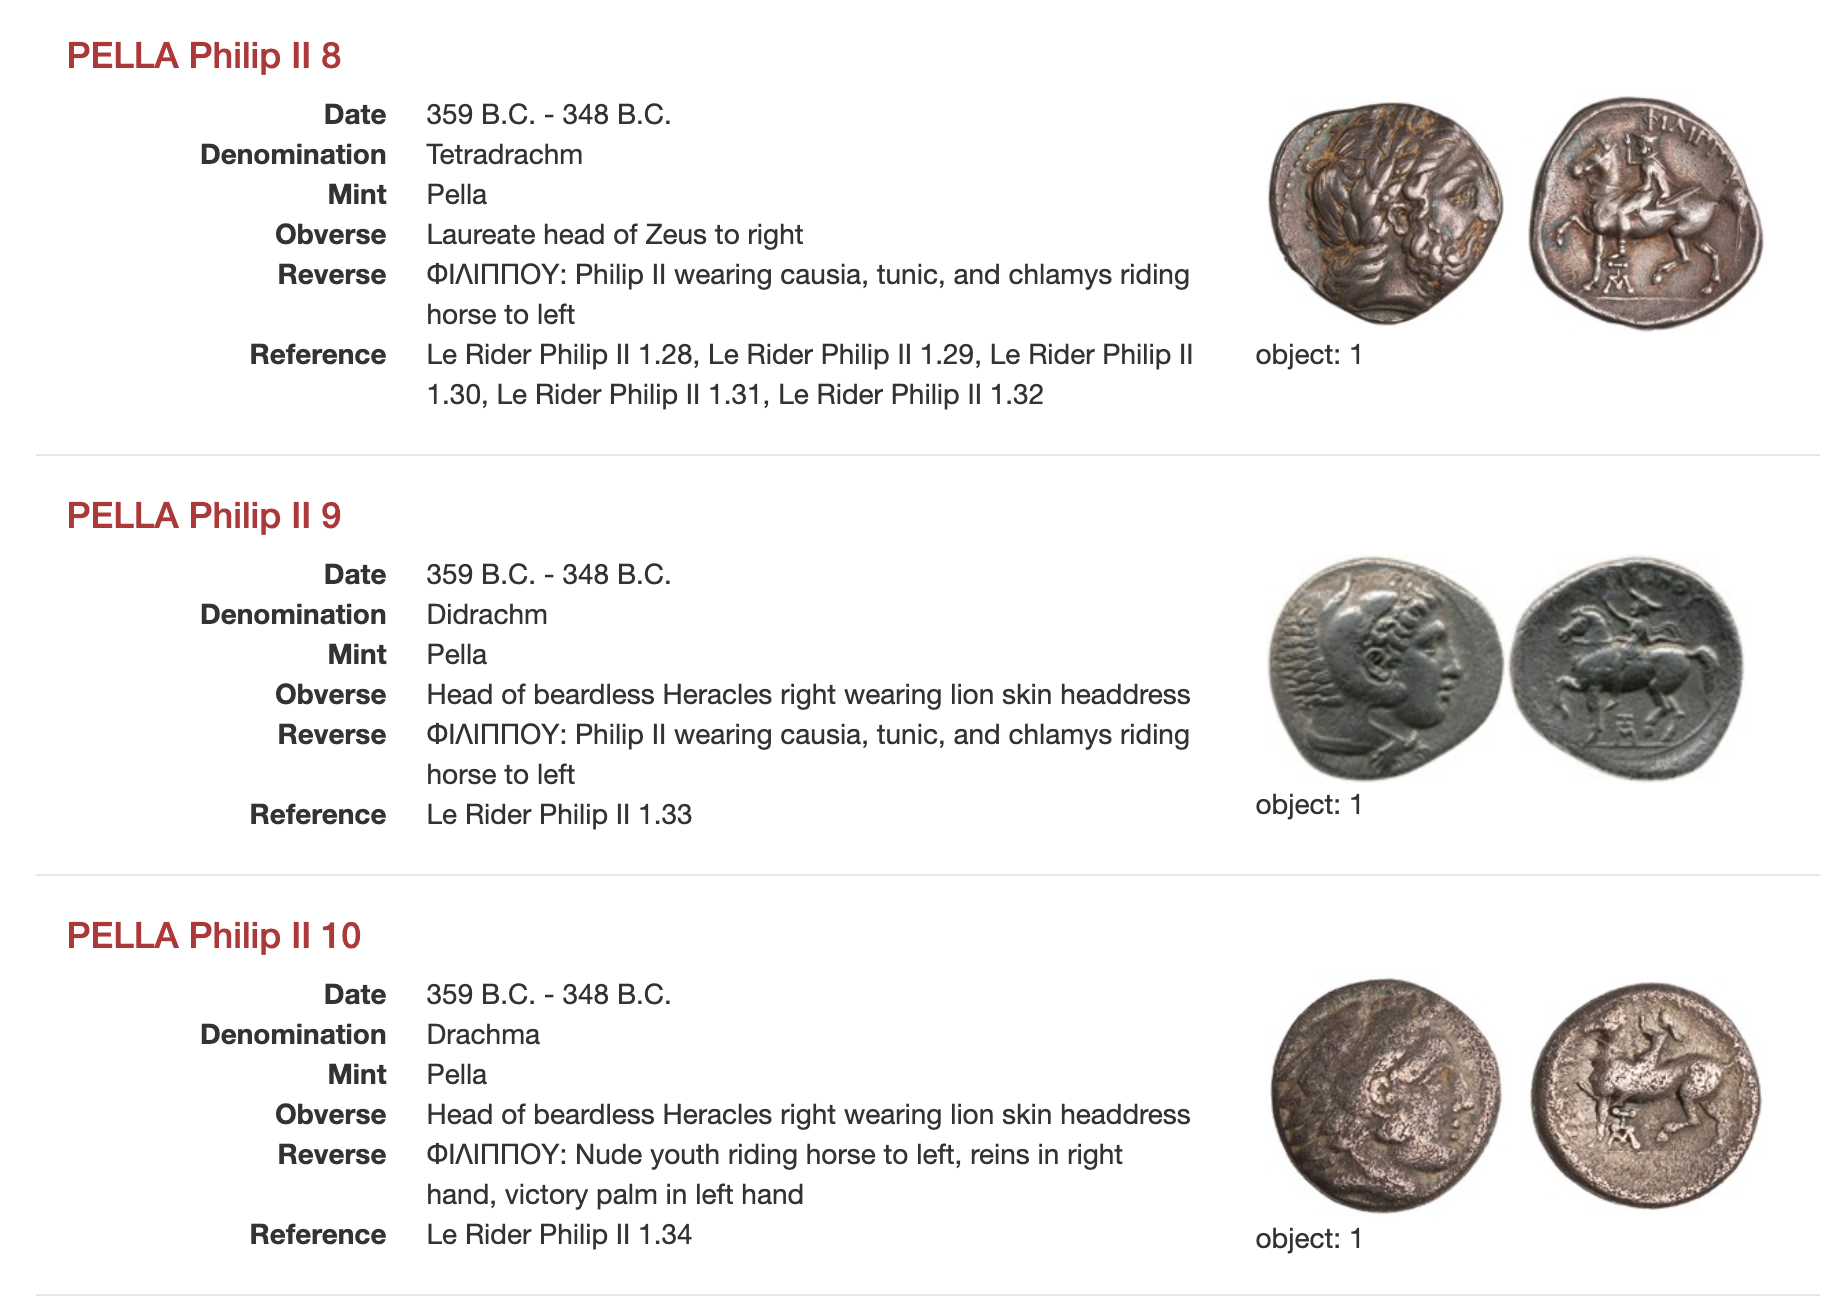 The Coinage of Philip II now in PELLA